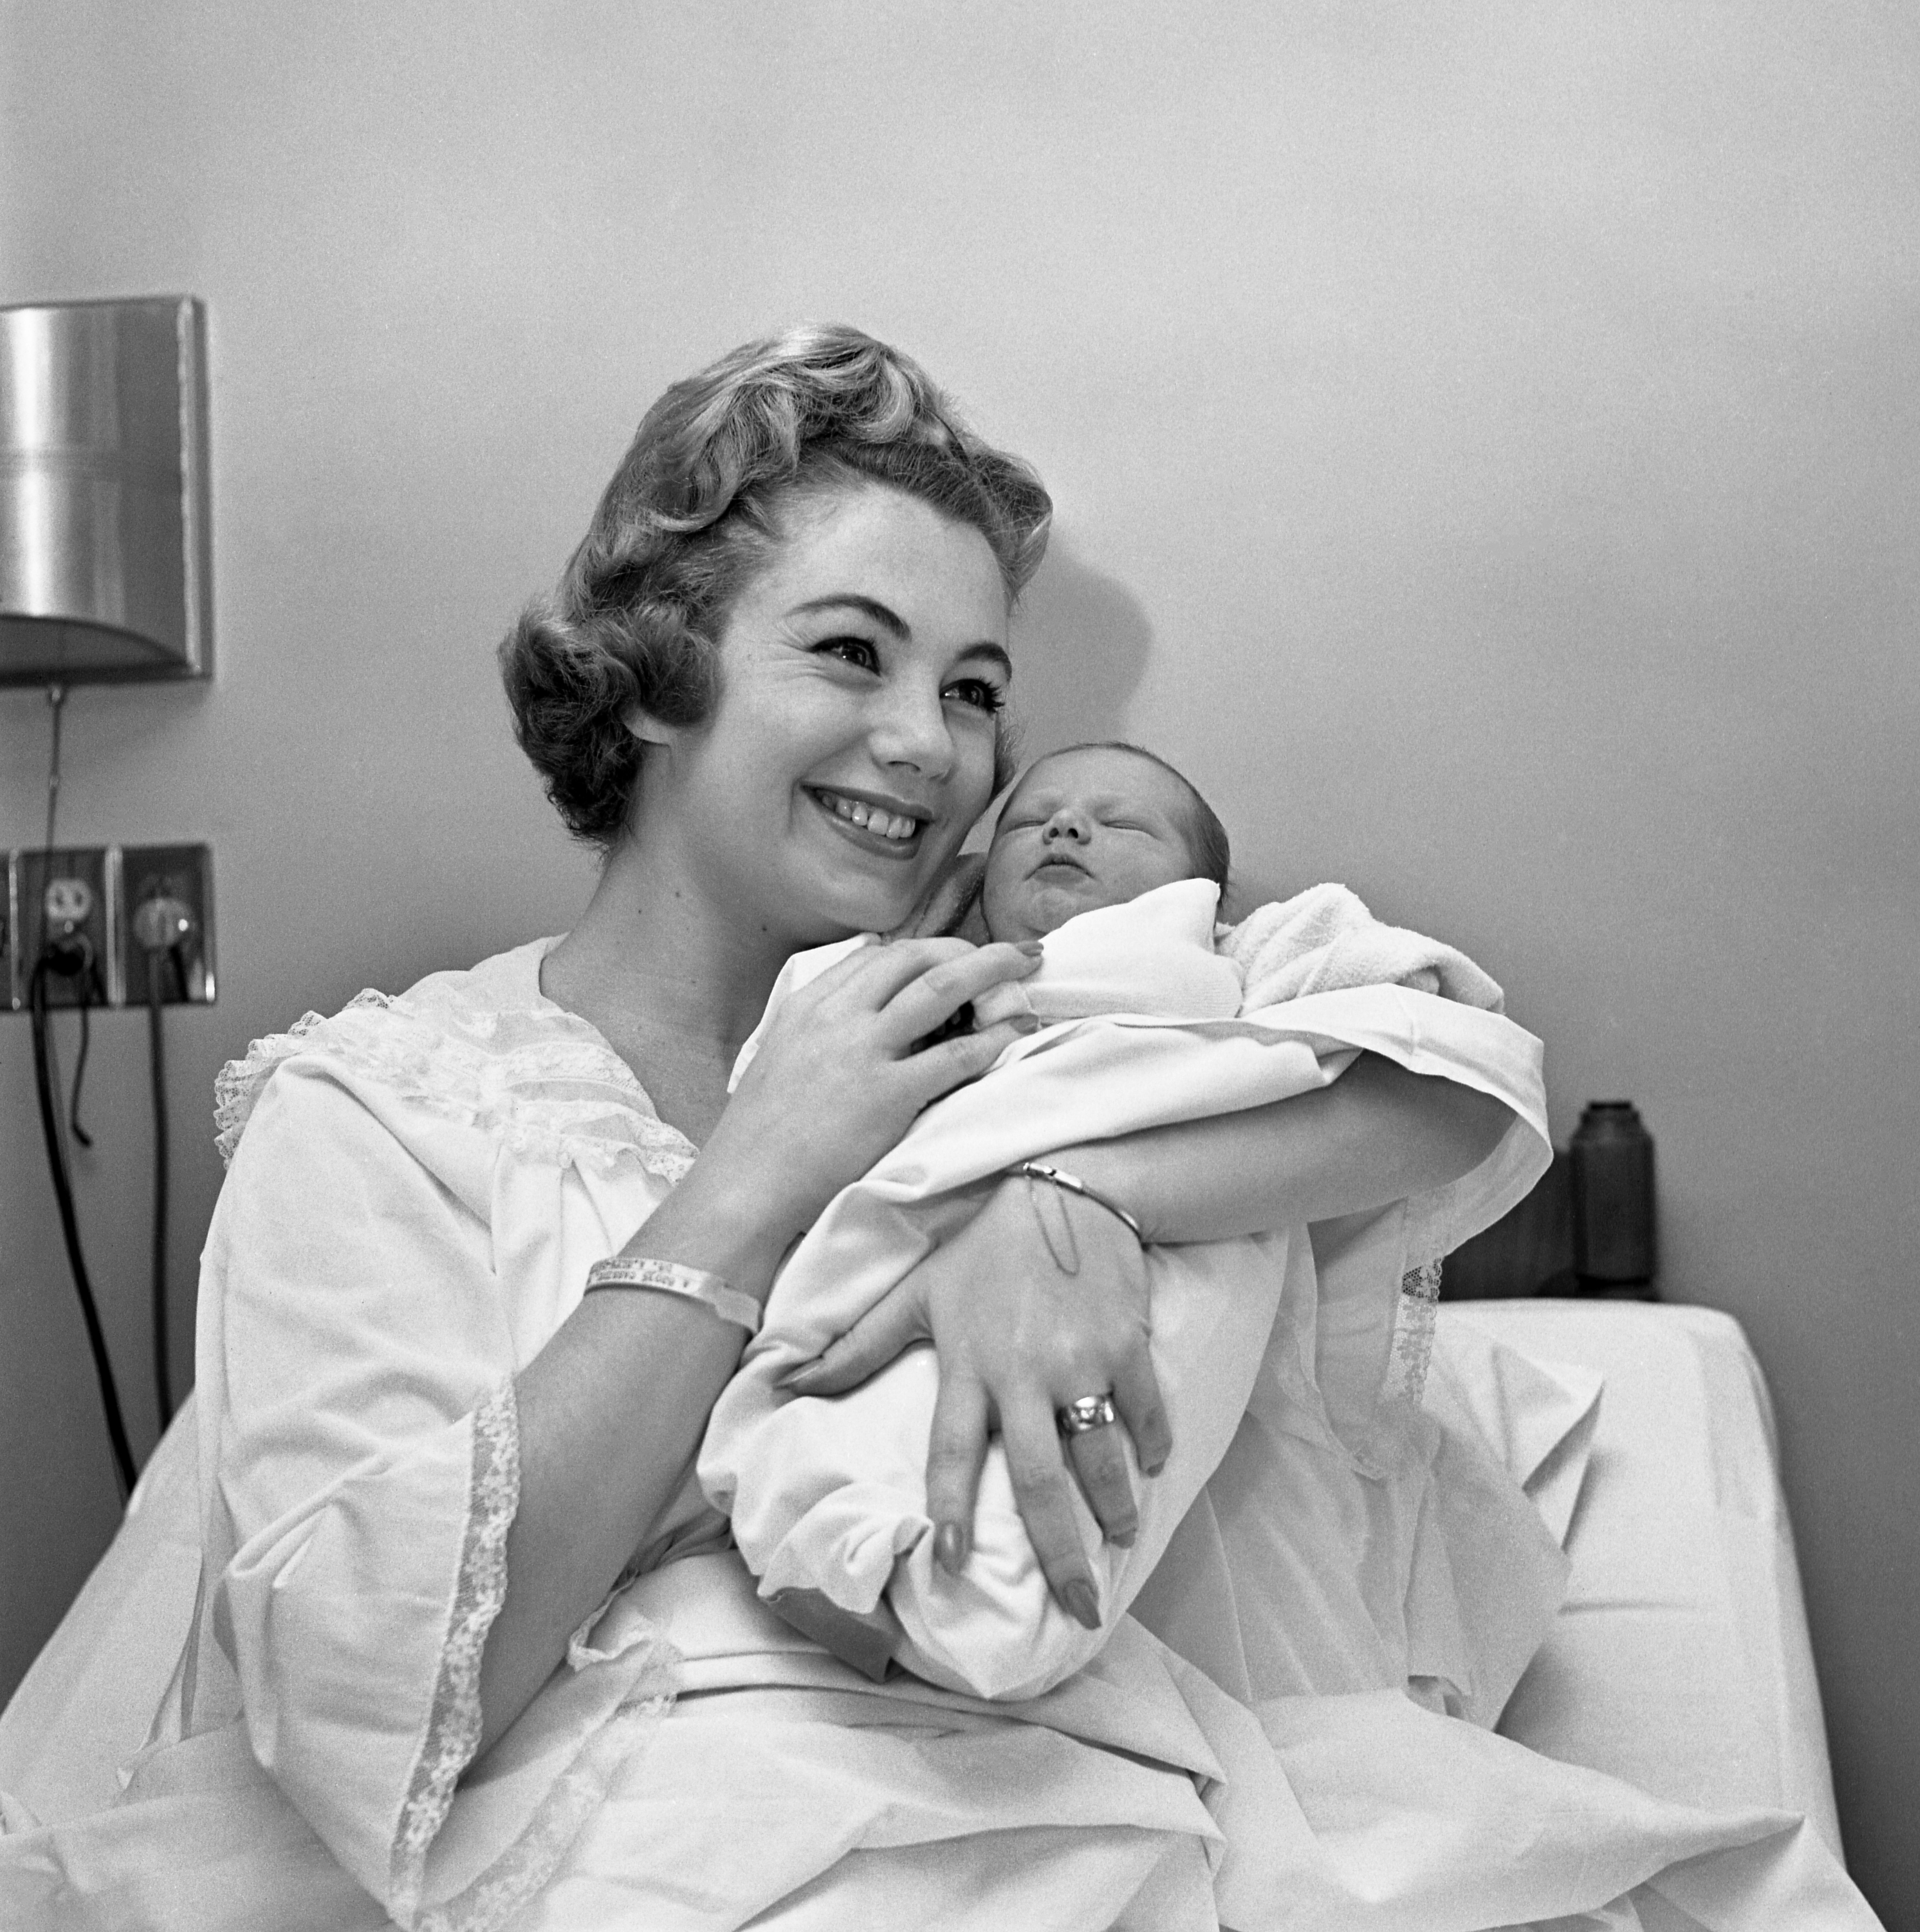 Shirley Jones with her new son, Patrick William, on January 4, 1962. | Source: Bettmann Archive/Getty Images